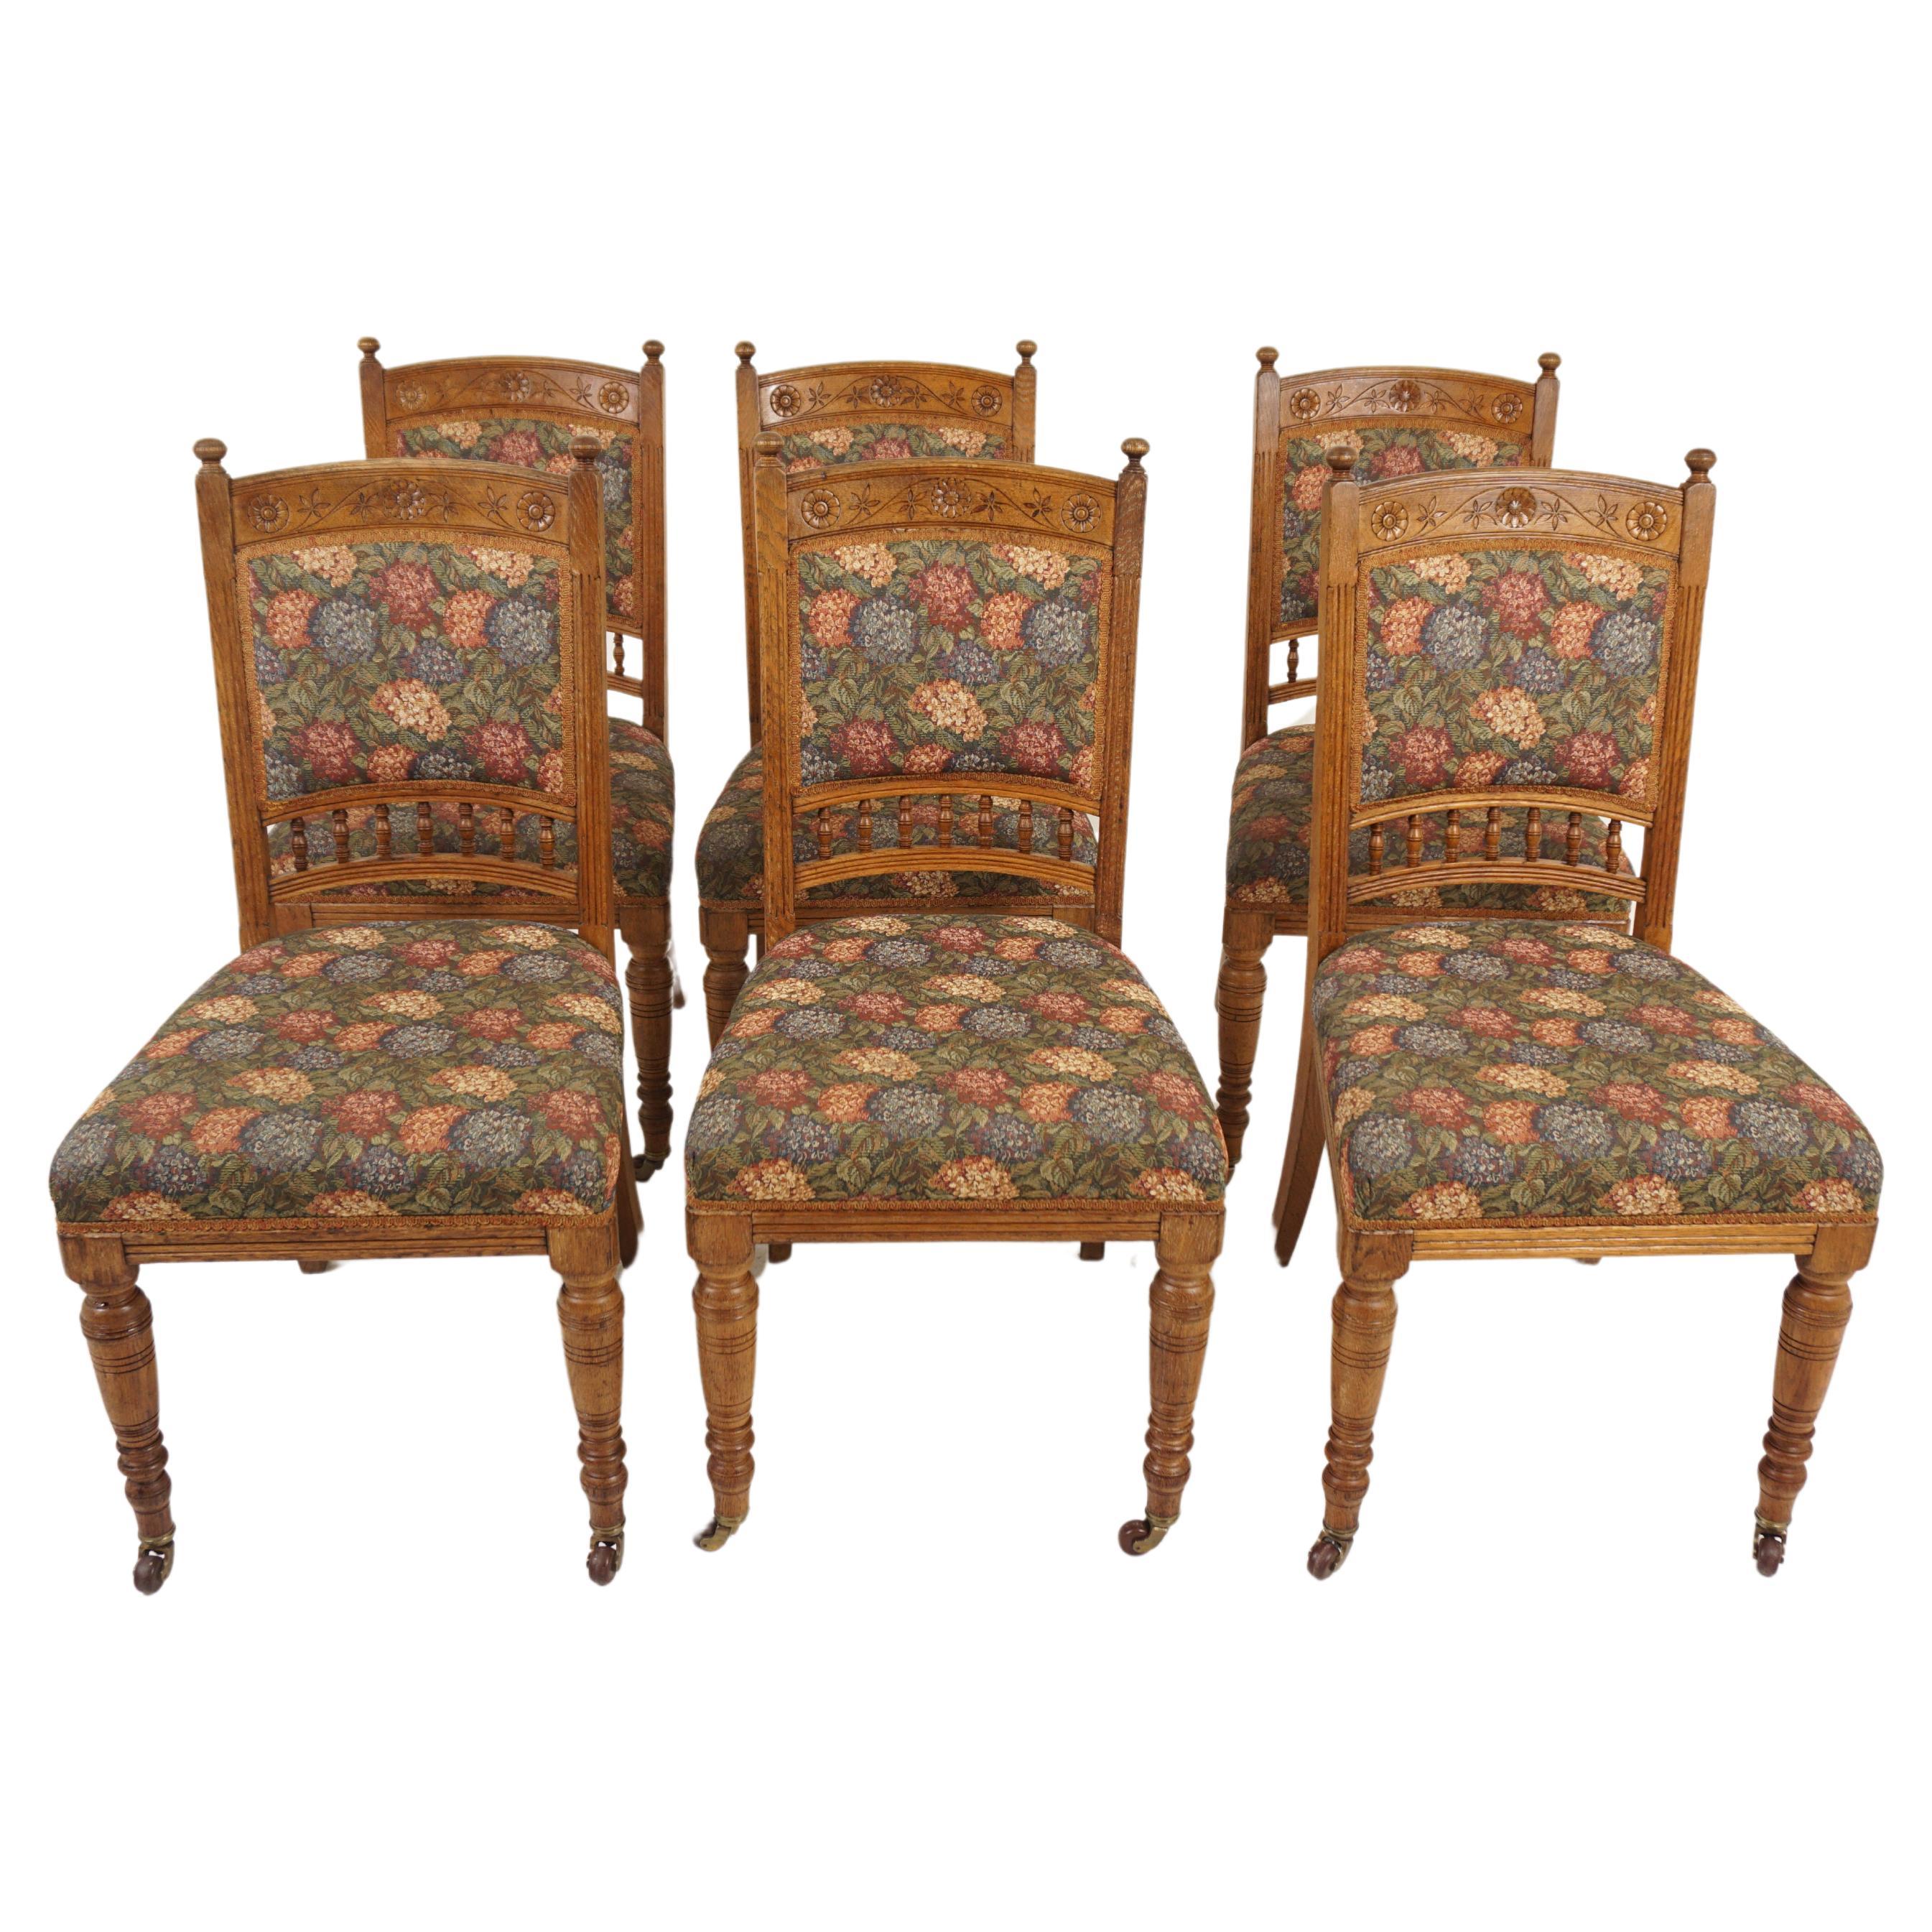 6 Victorian Oak Upholstered Dining Chairs, Scotland 1880, H1169